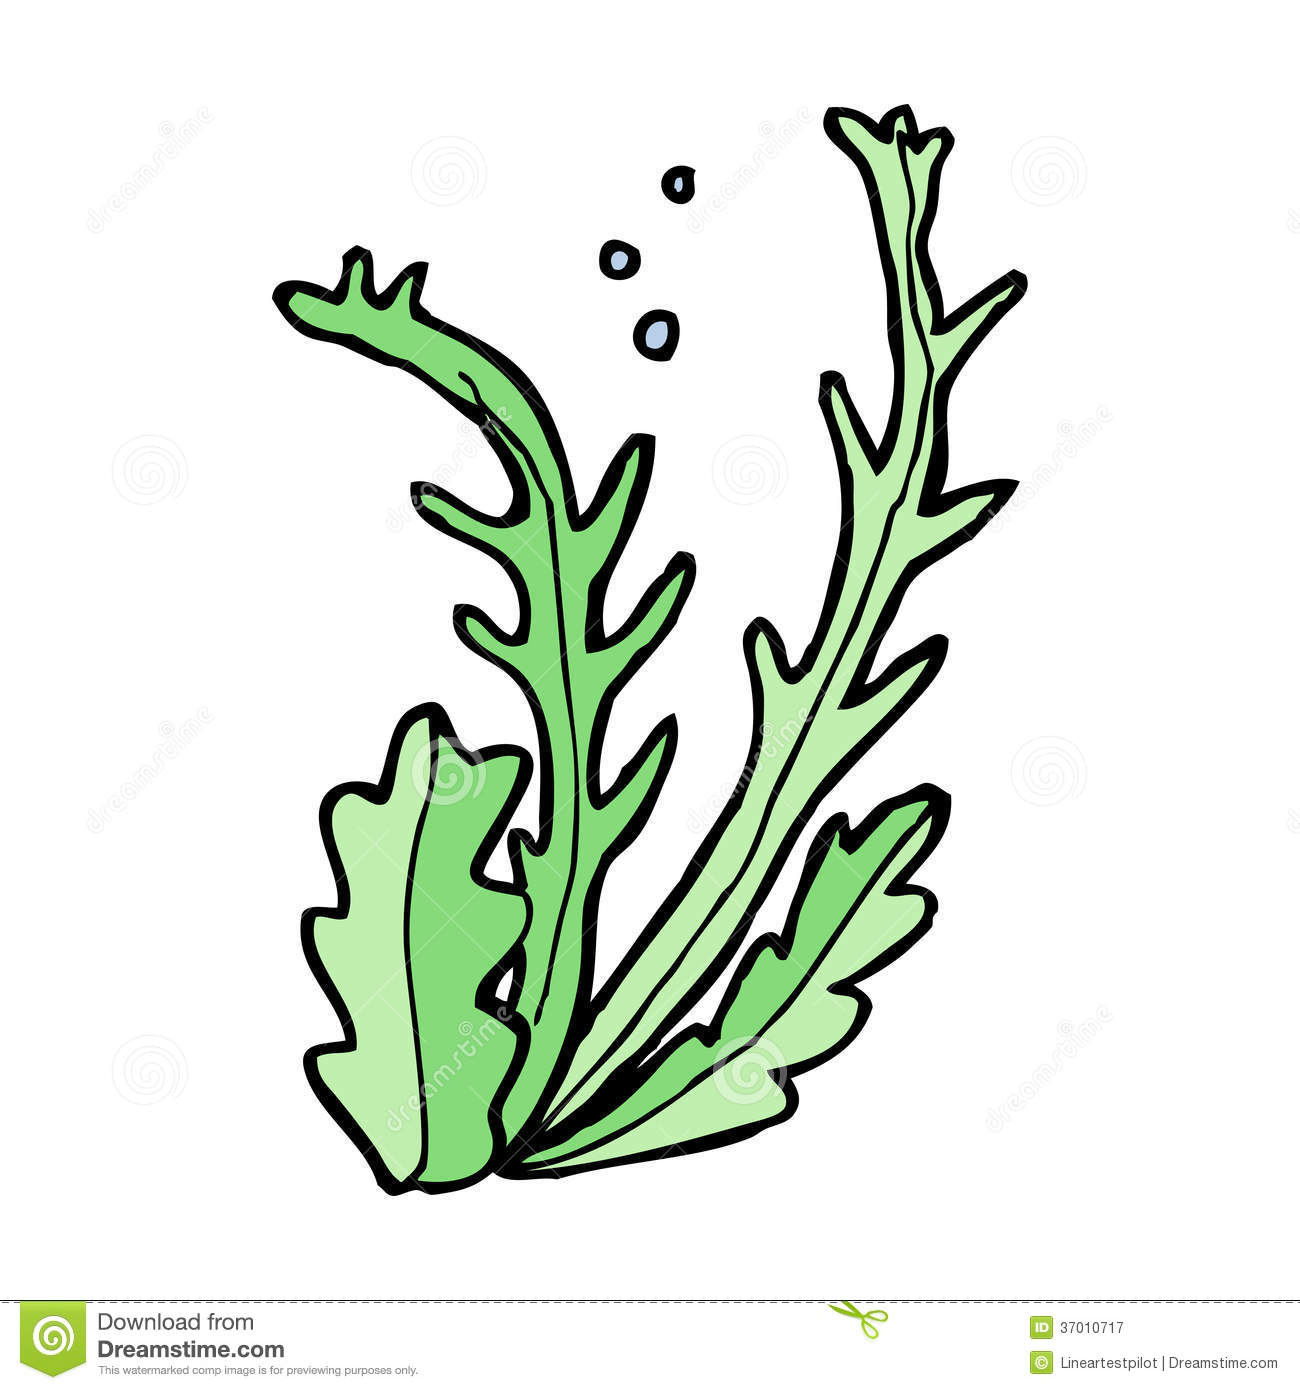 Seaweed Clipart   Clipart Panda   Free Clipart Images